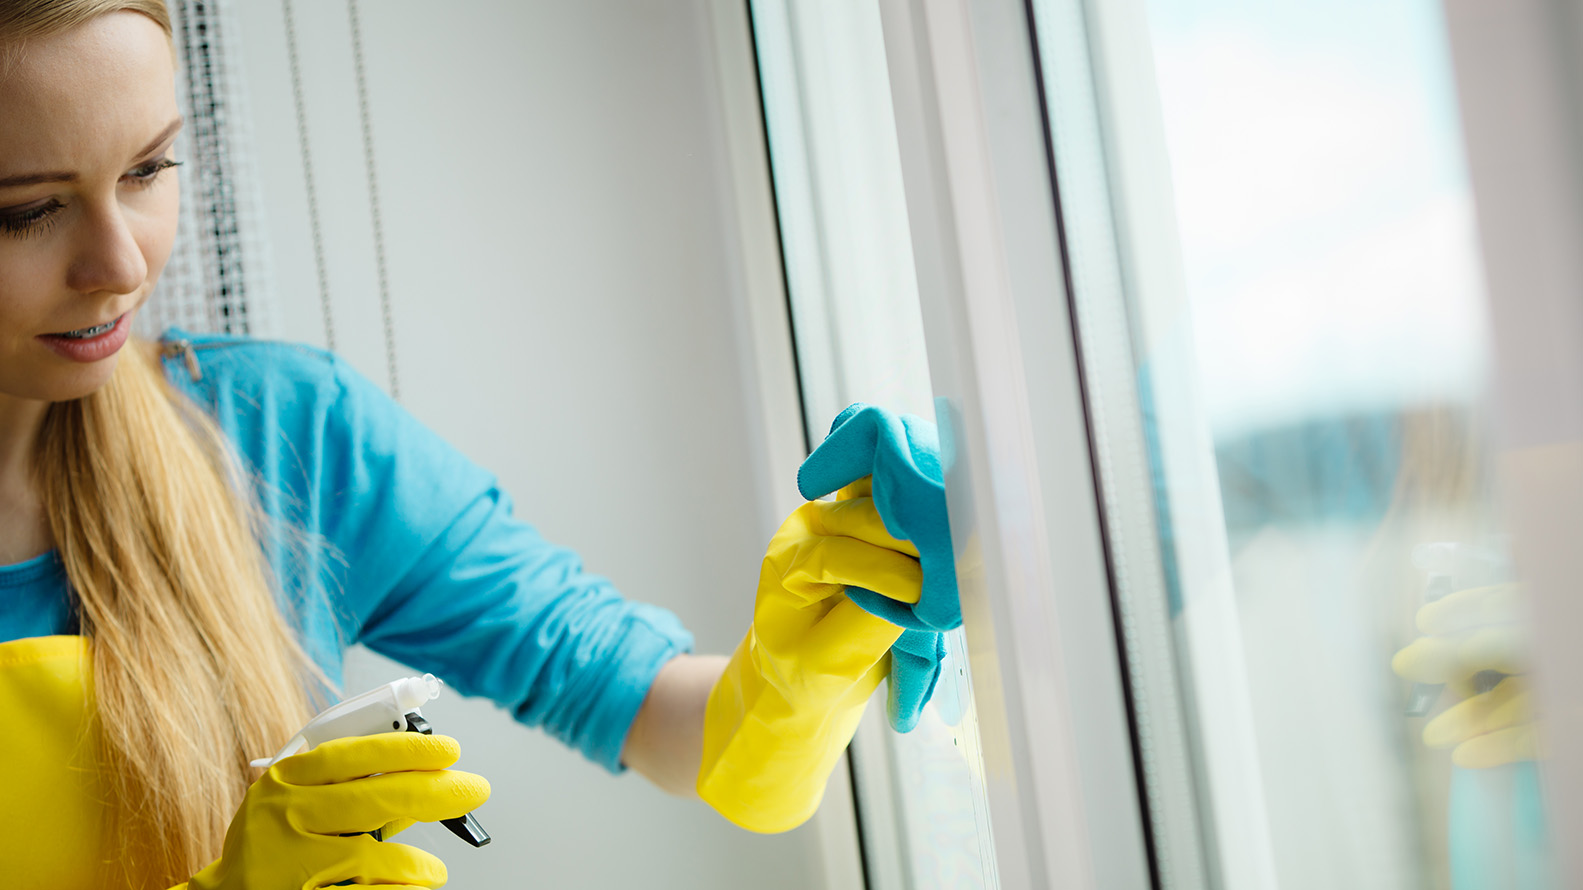 Window Cleaning Near Me - The best window cleaners nearby